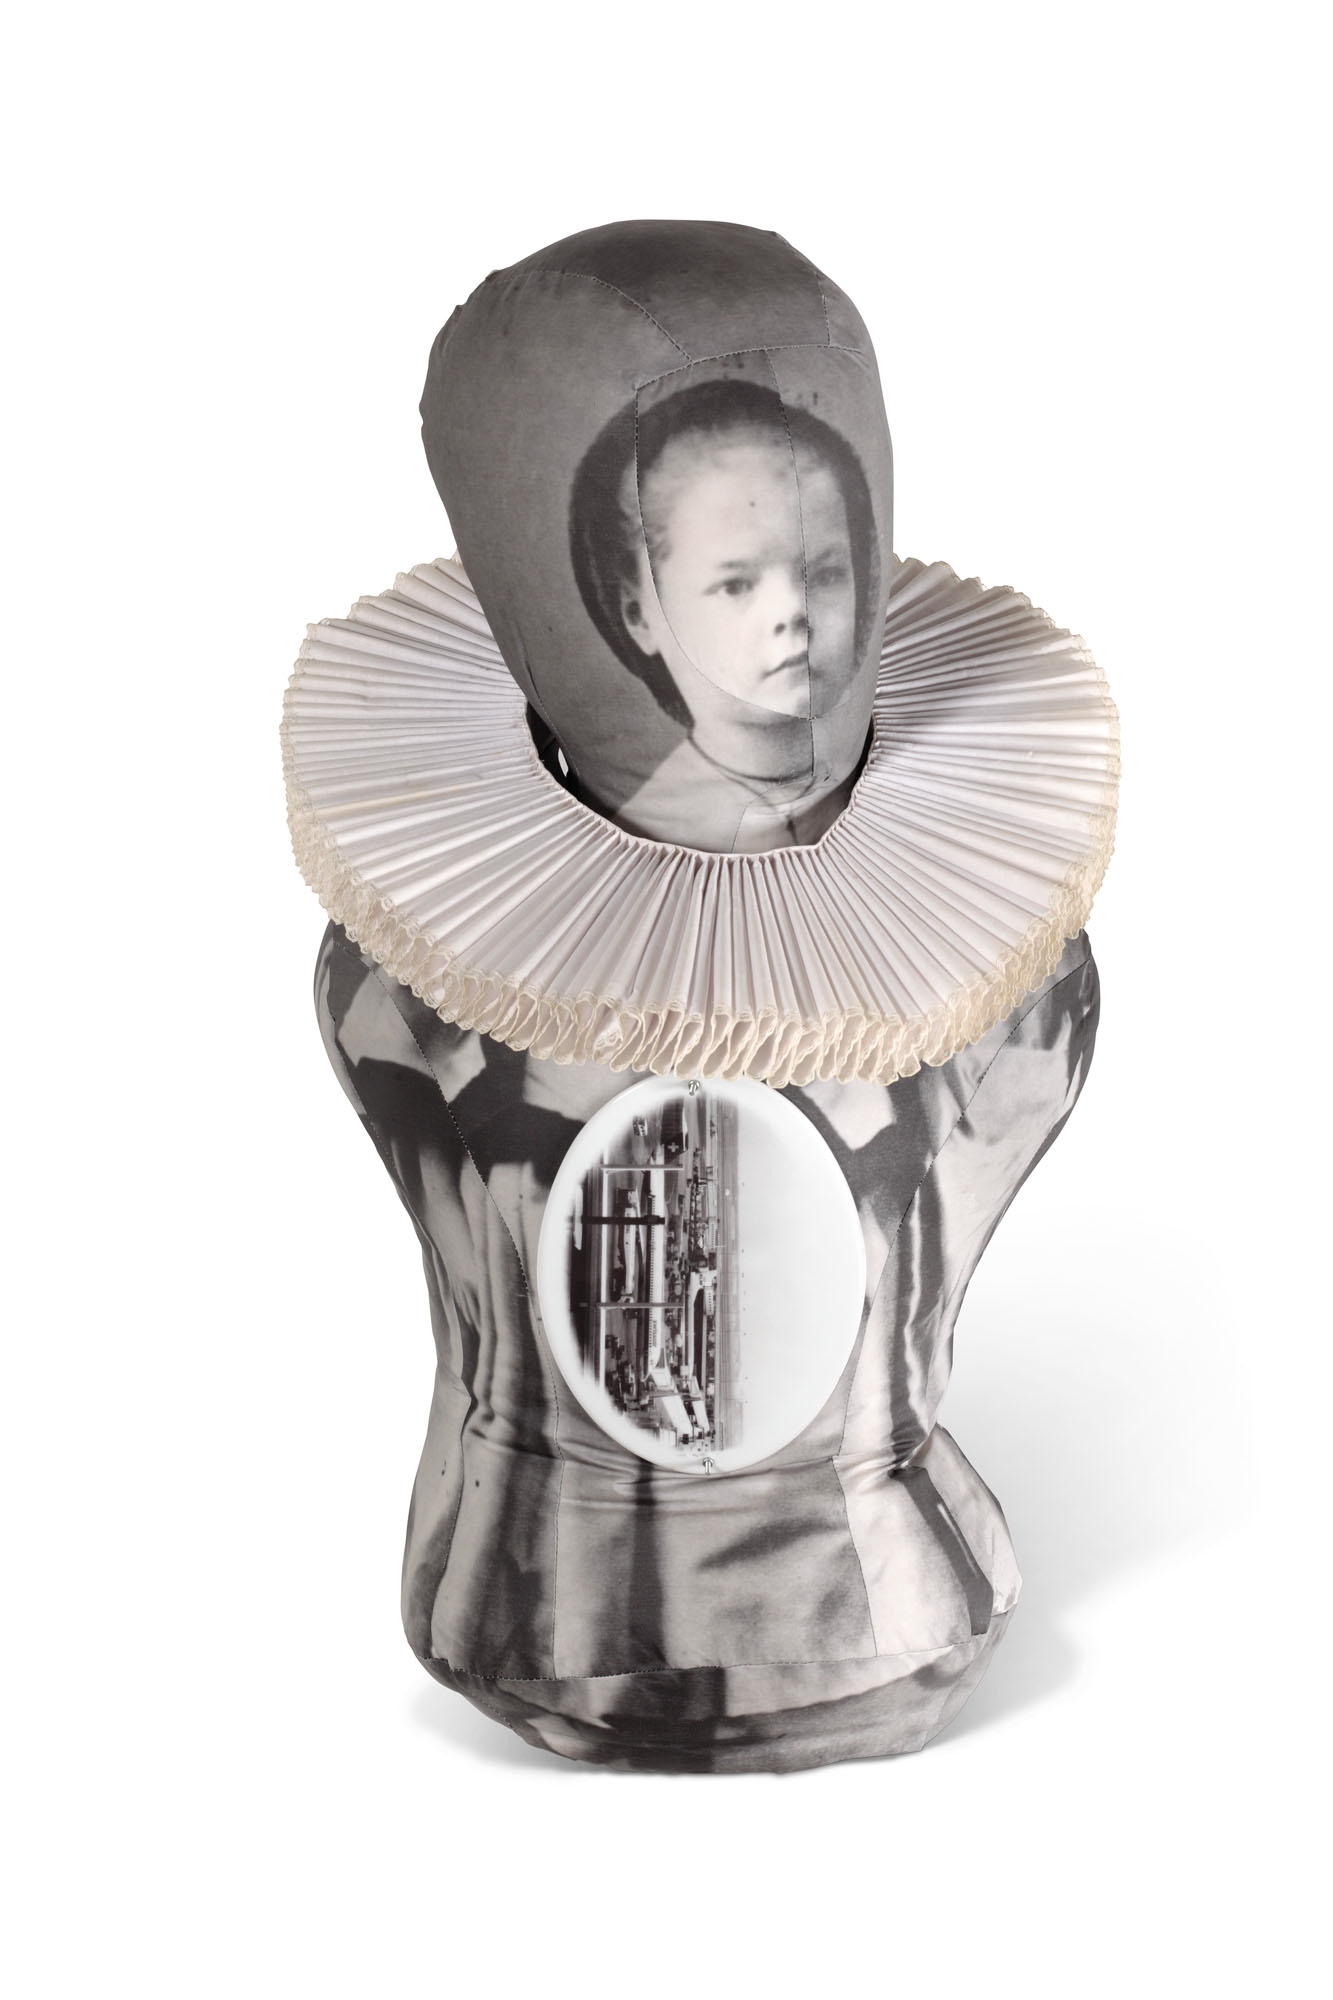 Artwork by Aernout Mik, Untitled (Dummy), Made of photo linen, fabric, ceramic and metal
